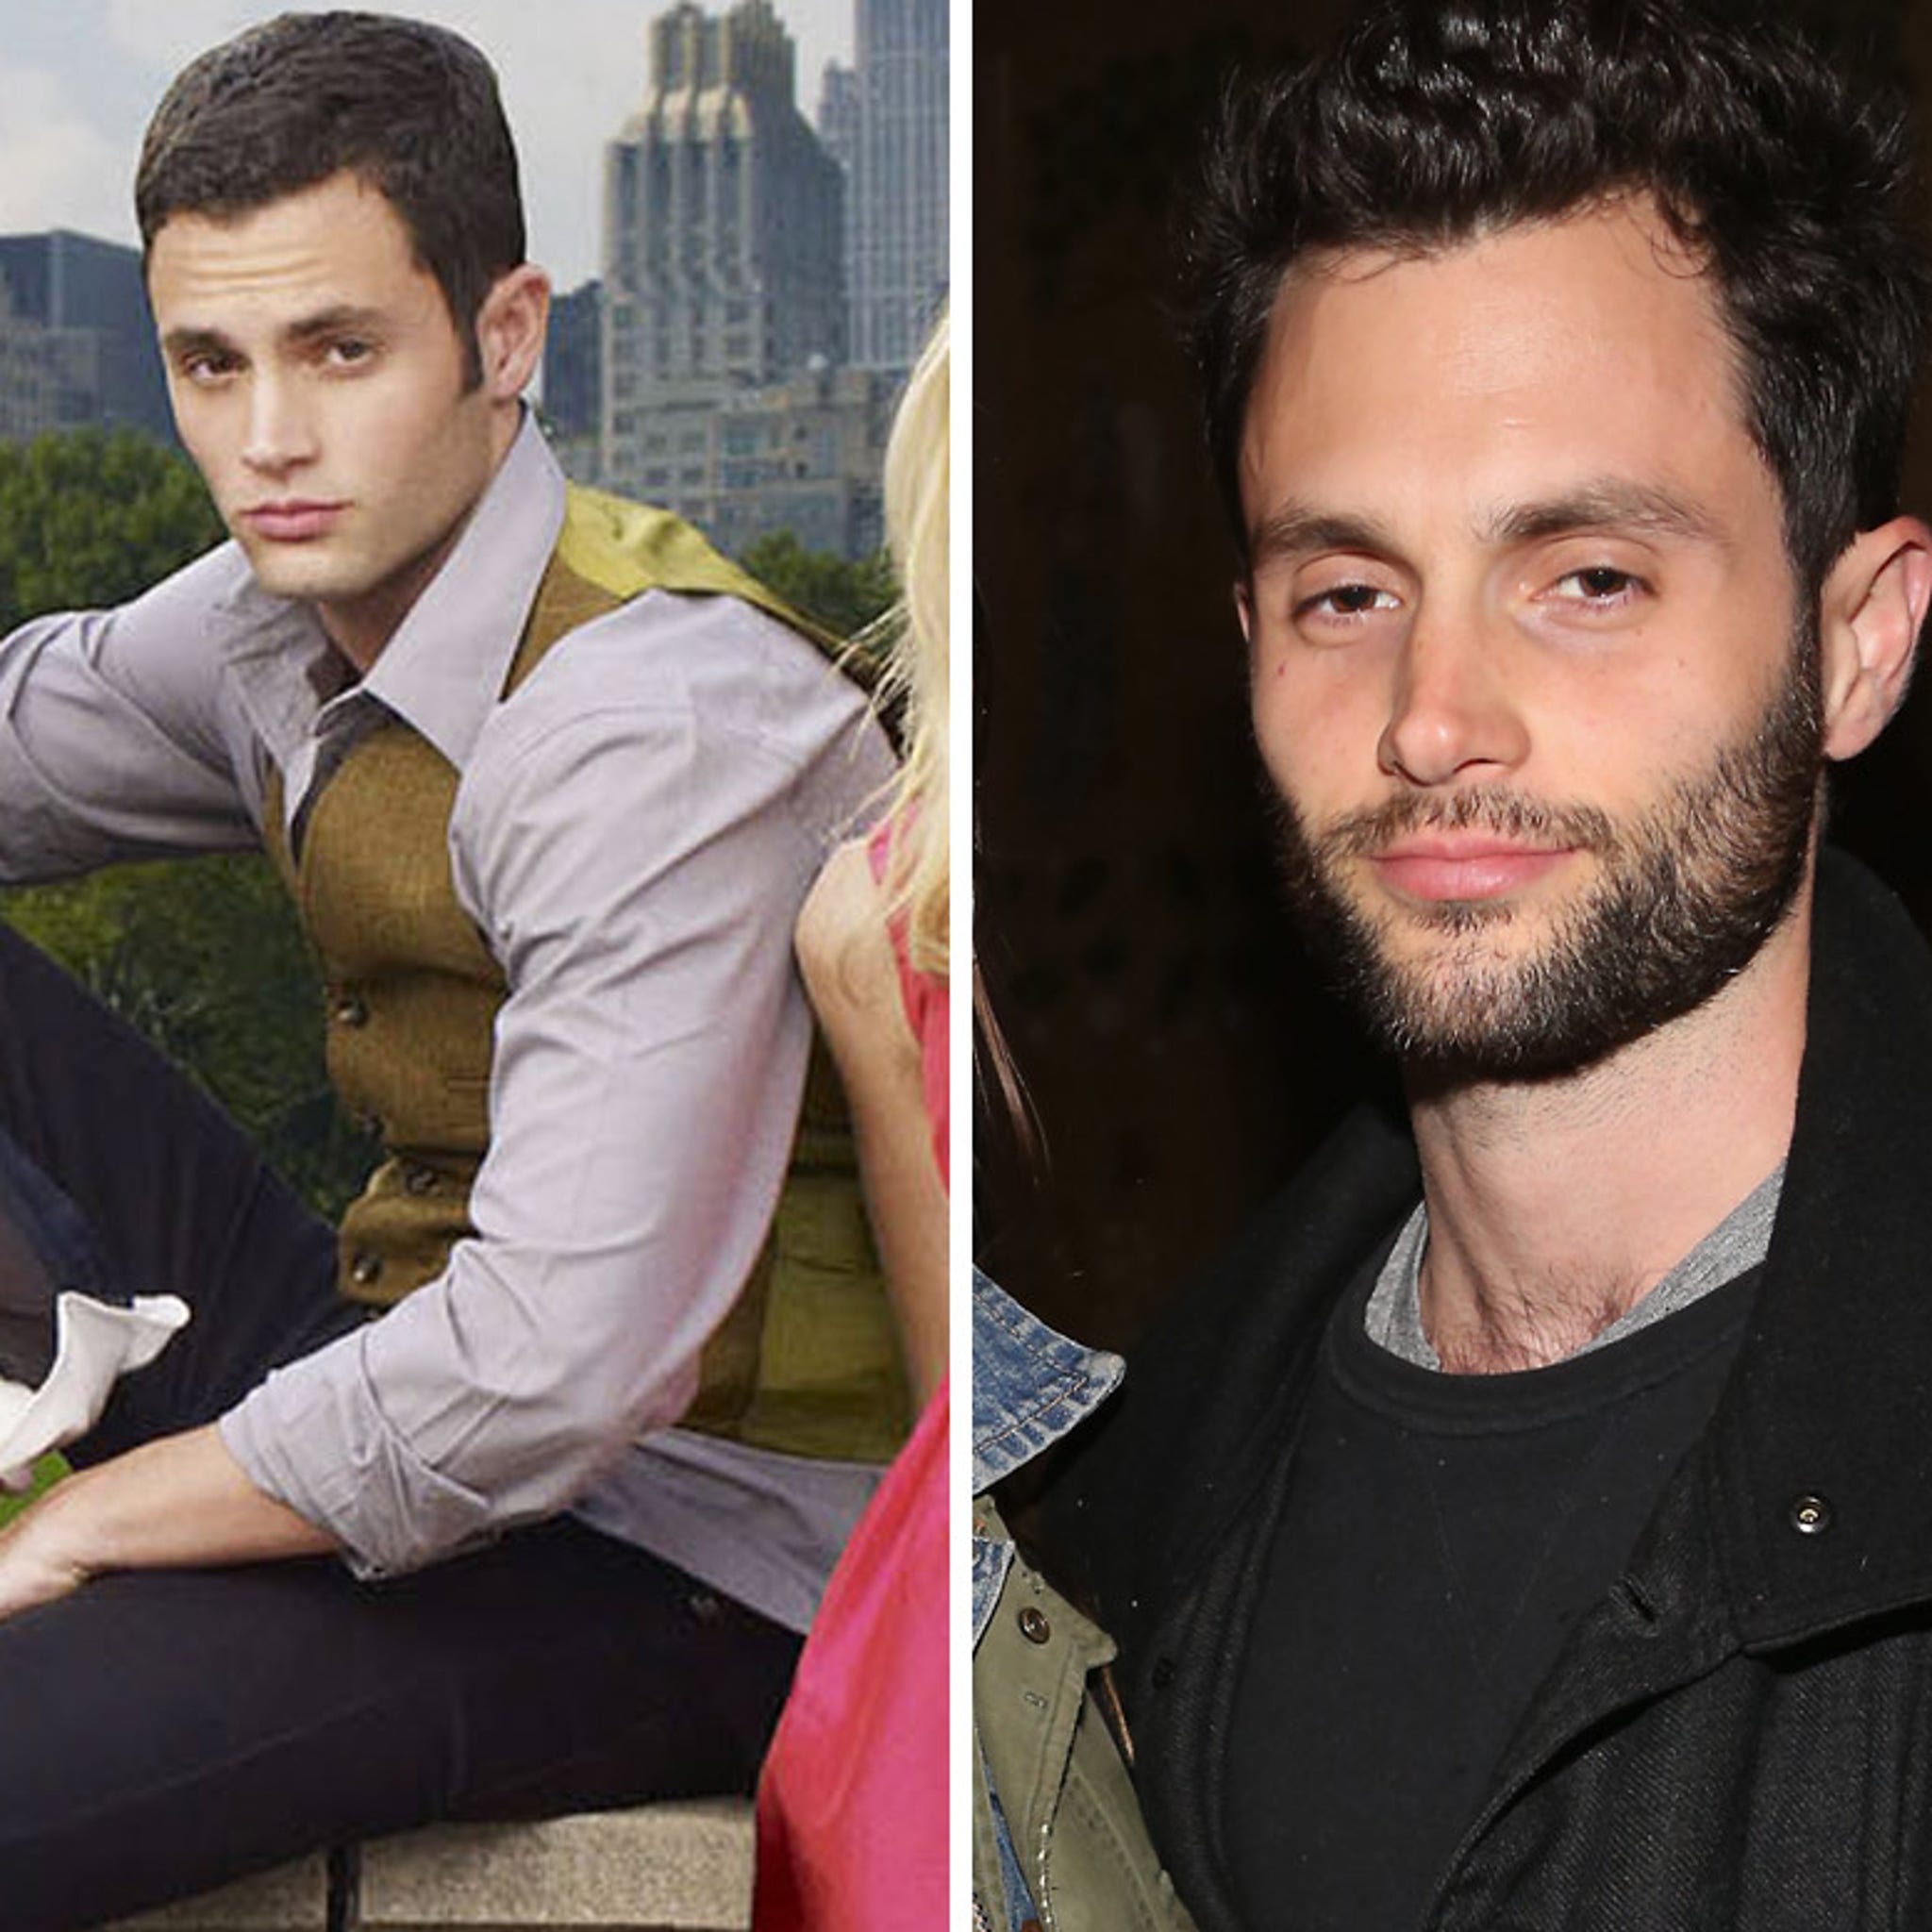 The Cast of Gossip Girl: Then and Now (13 Photos)